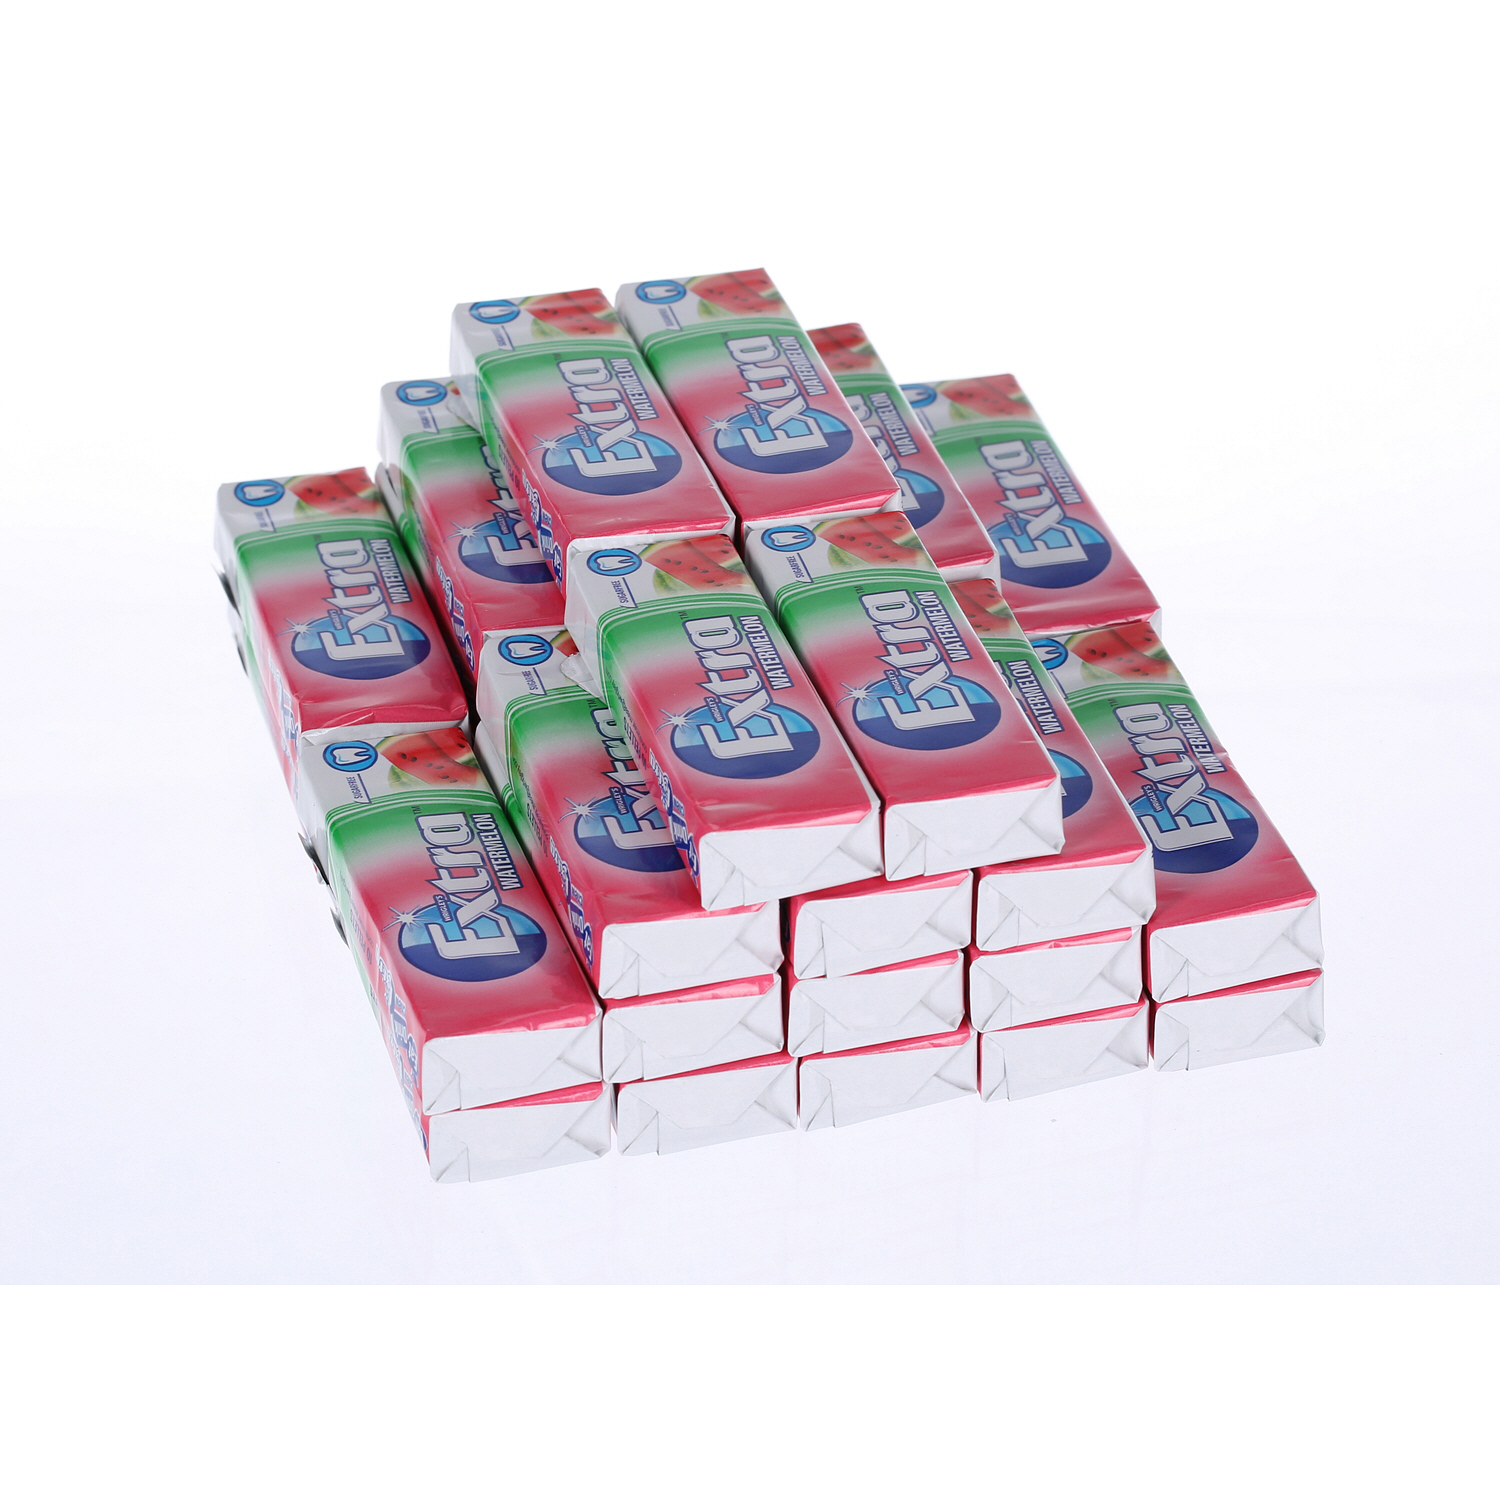 Wrigley's Extra Watermelon Chewing Gum 32.2gm × 30'S